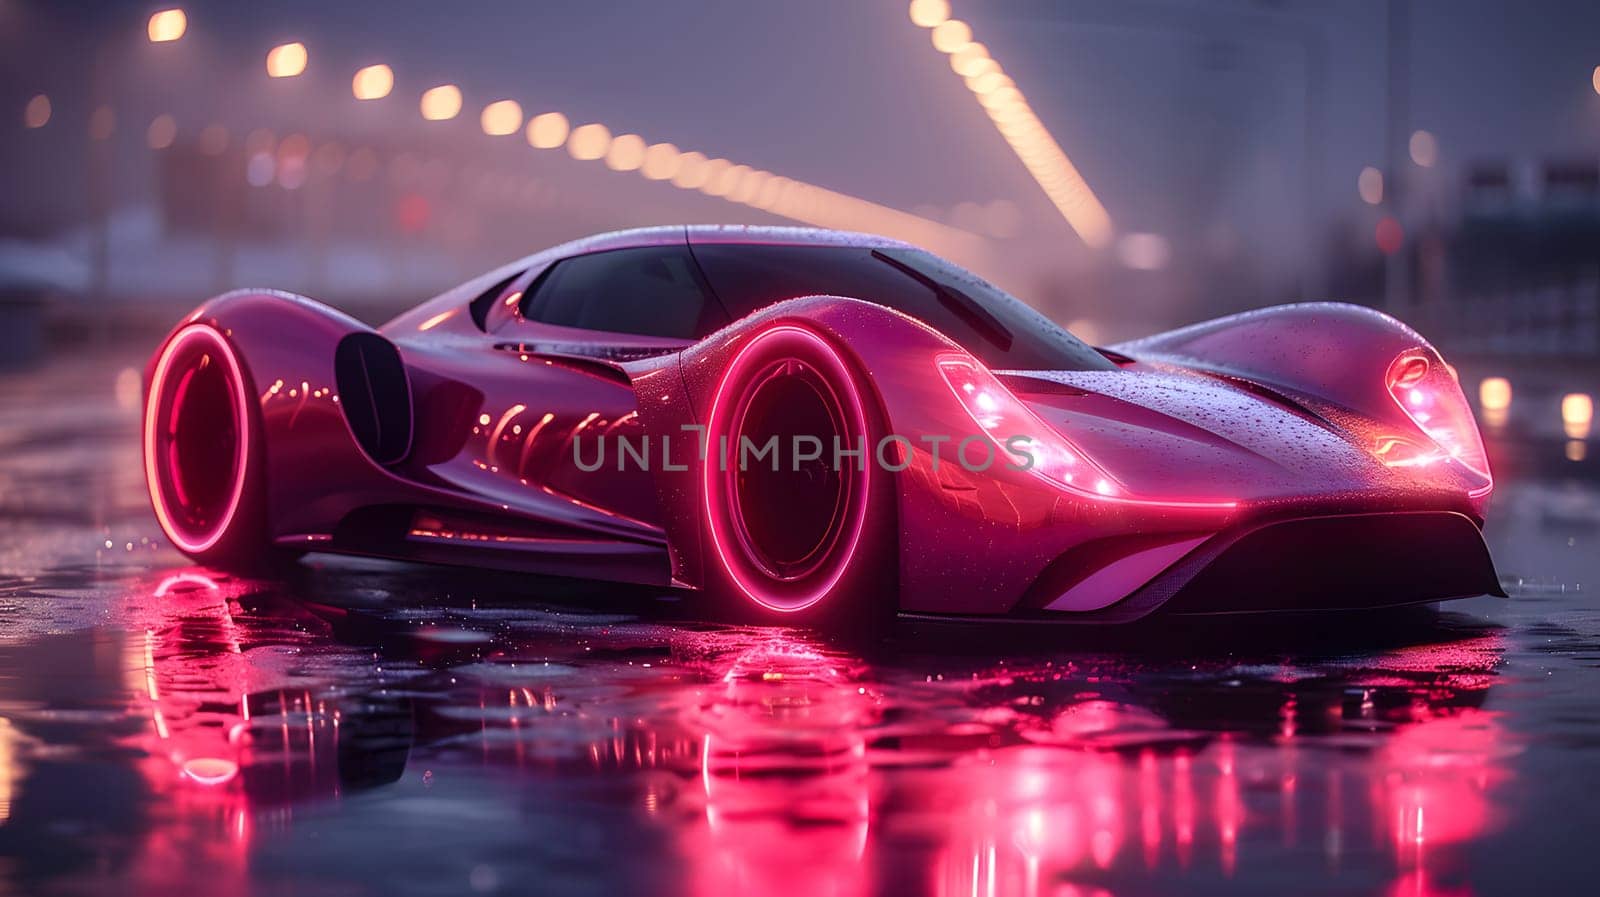 A magenta classic car equipped with futuristic automotive lighting is driving along a wet street at night, showcasing innovative automotive design